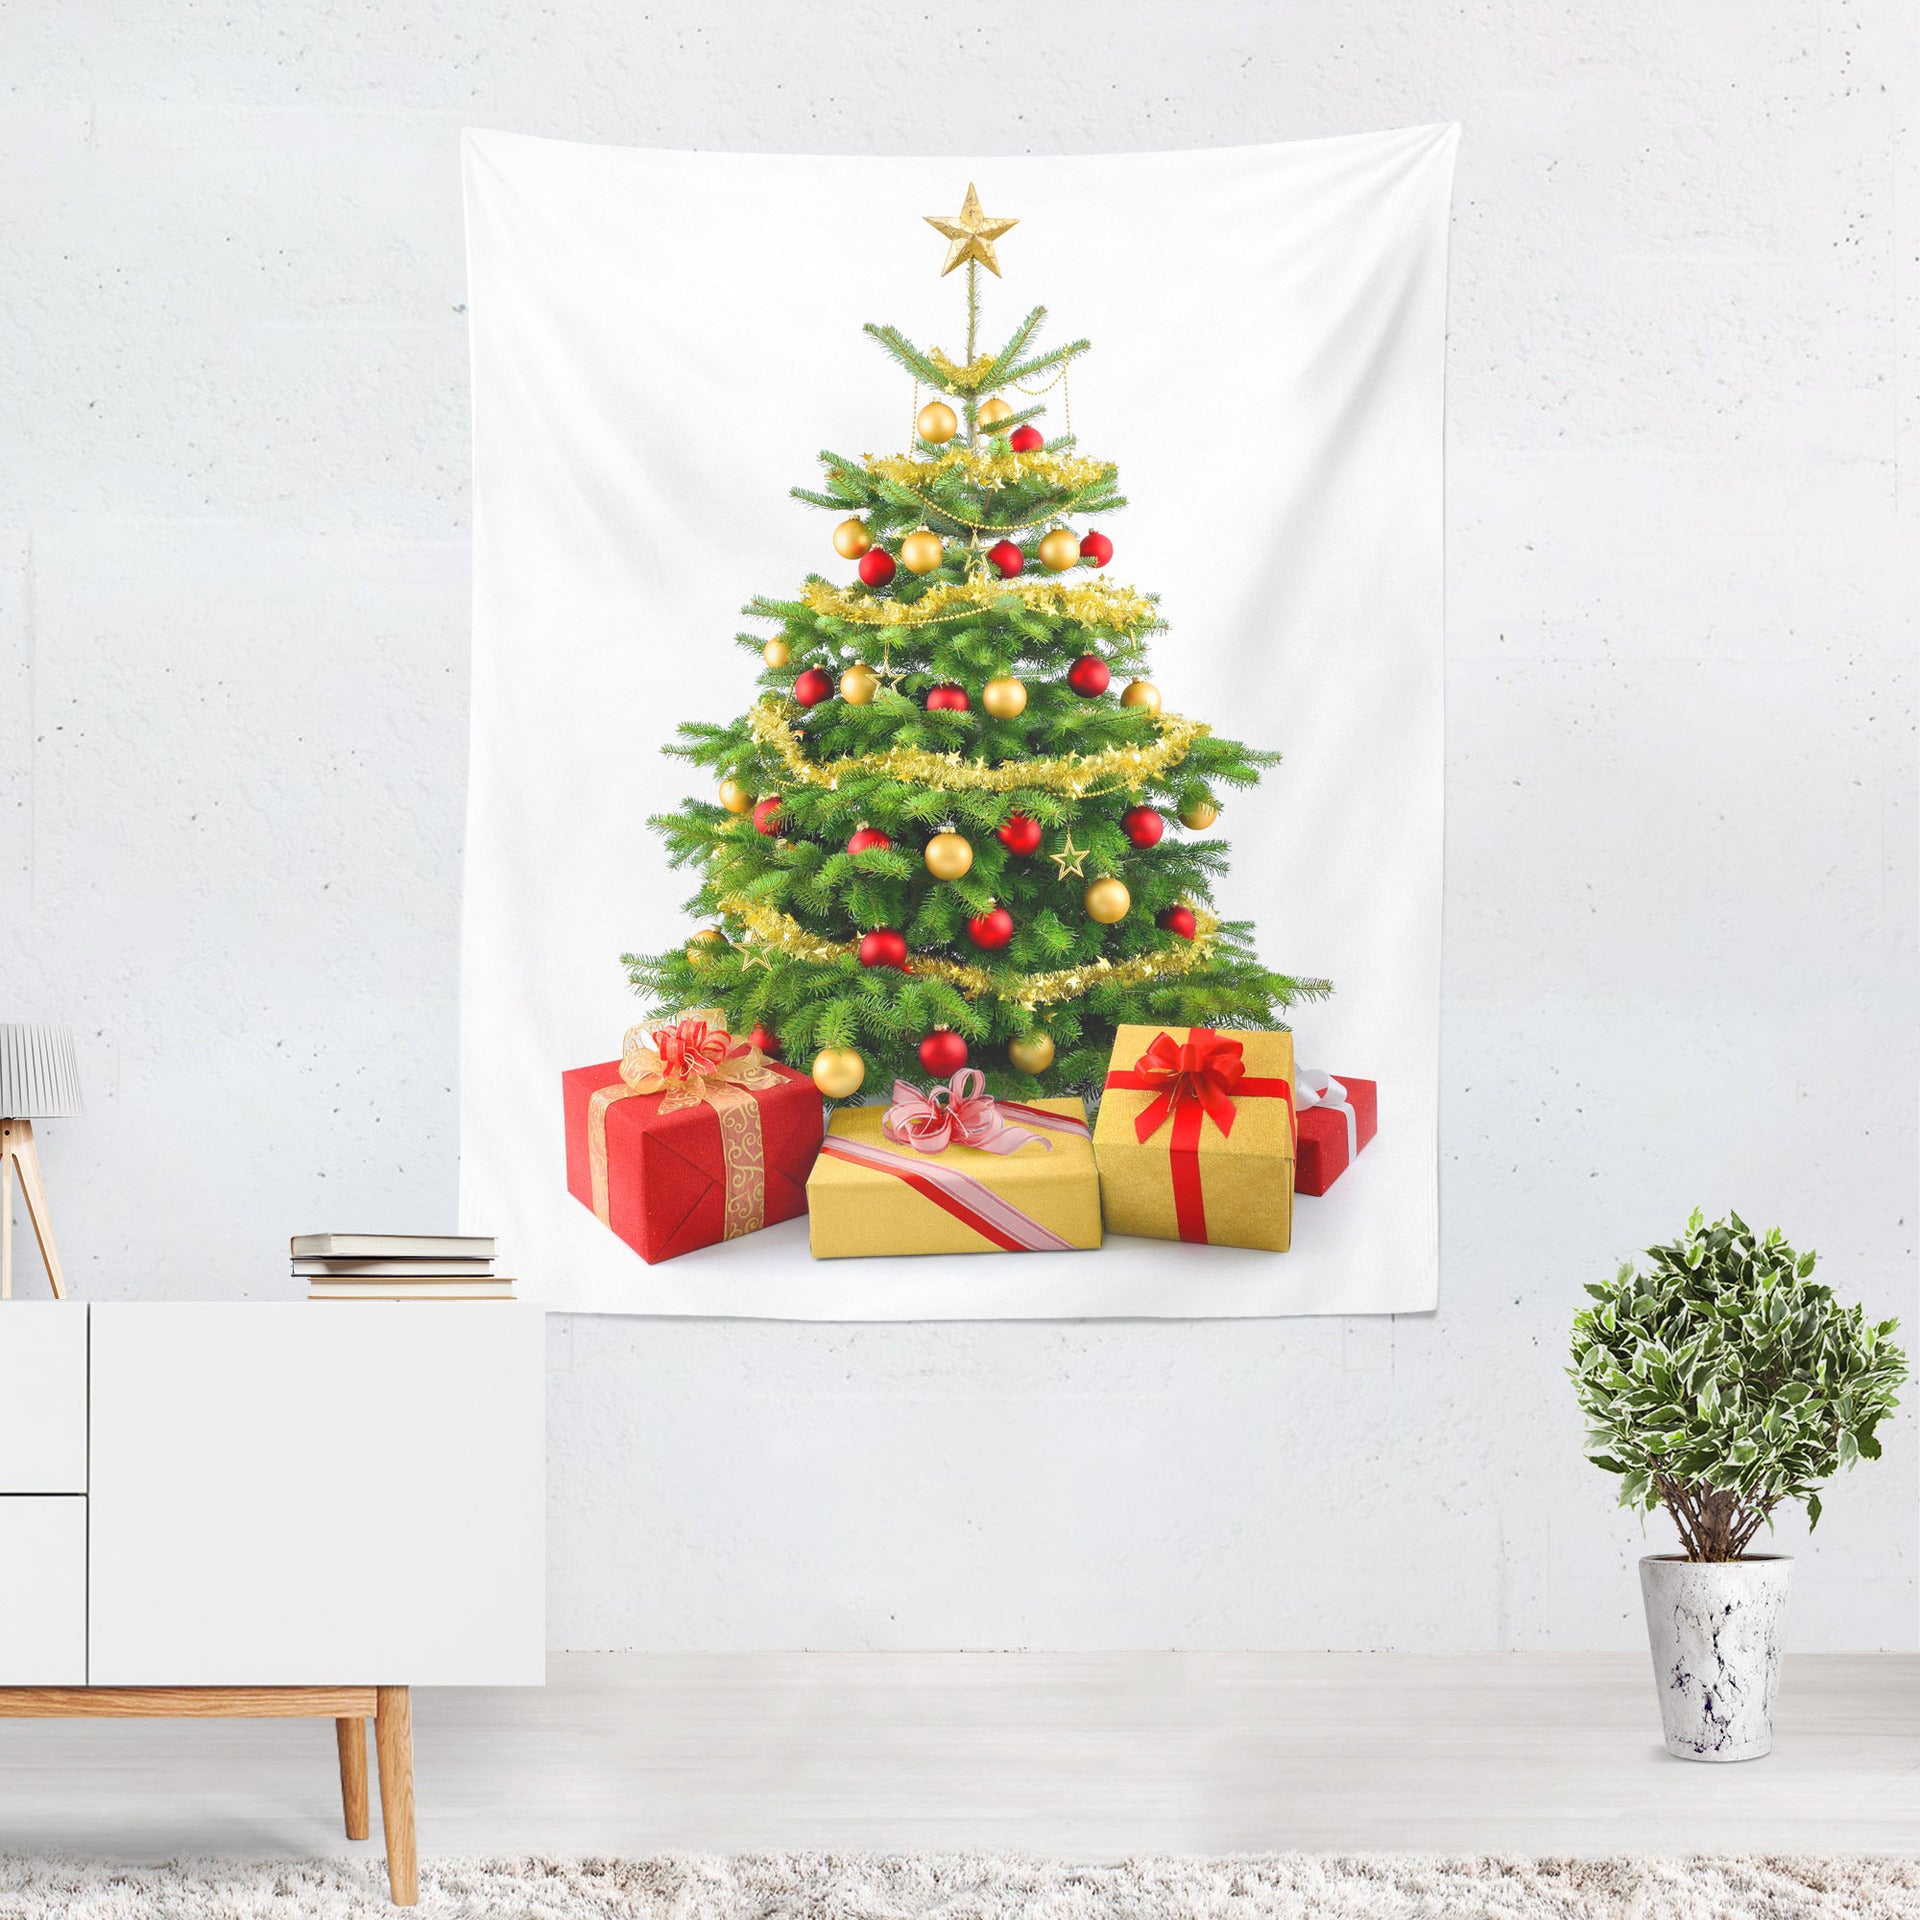 Christmas Tree Tapestry For Home Wall Decor